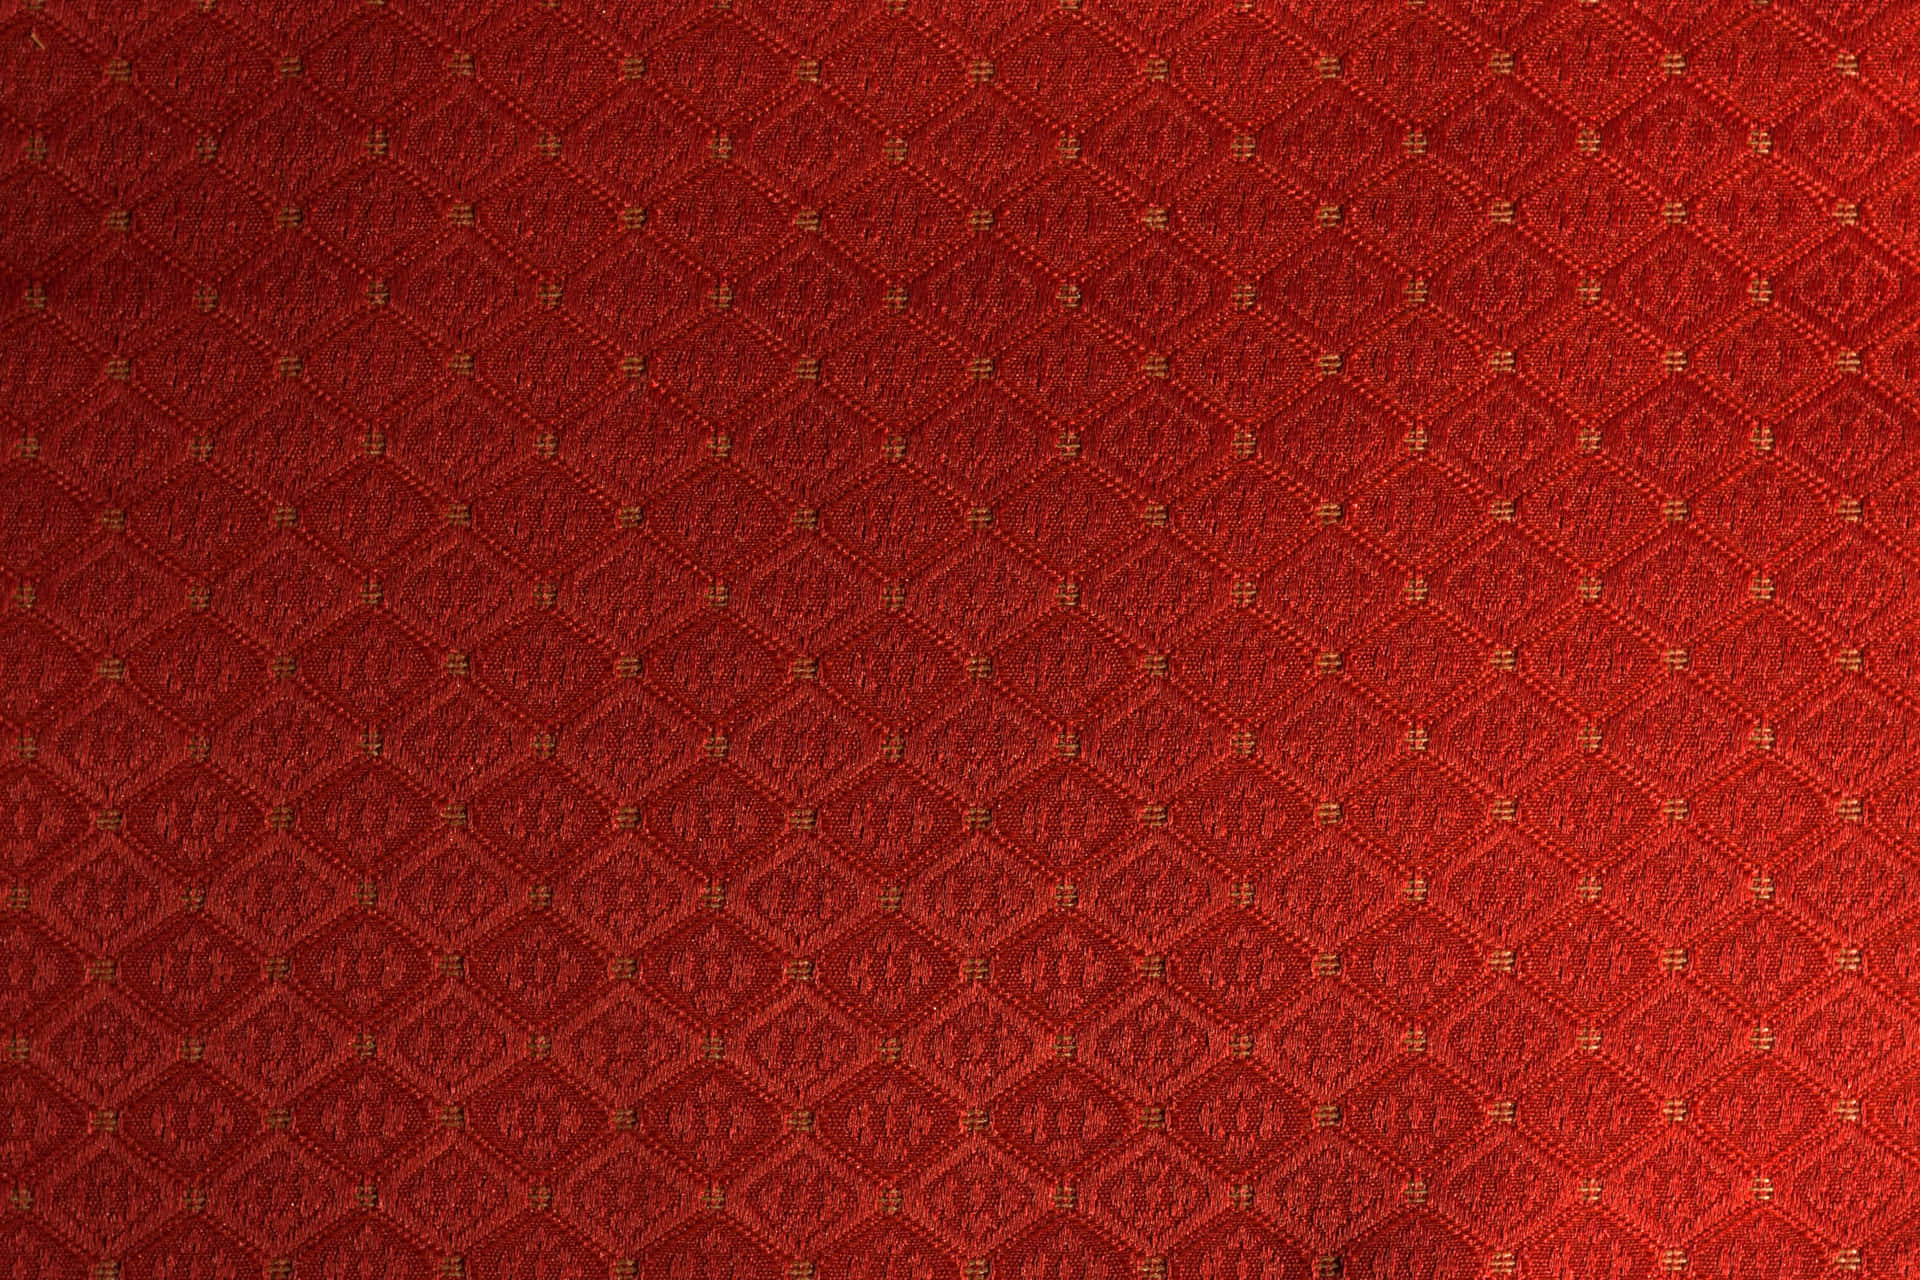 Red Piece Of Fabric Texture Wallpaper